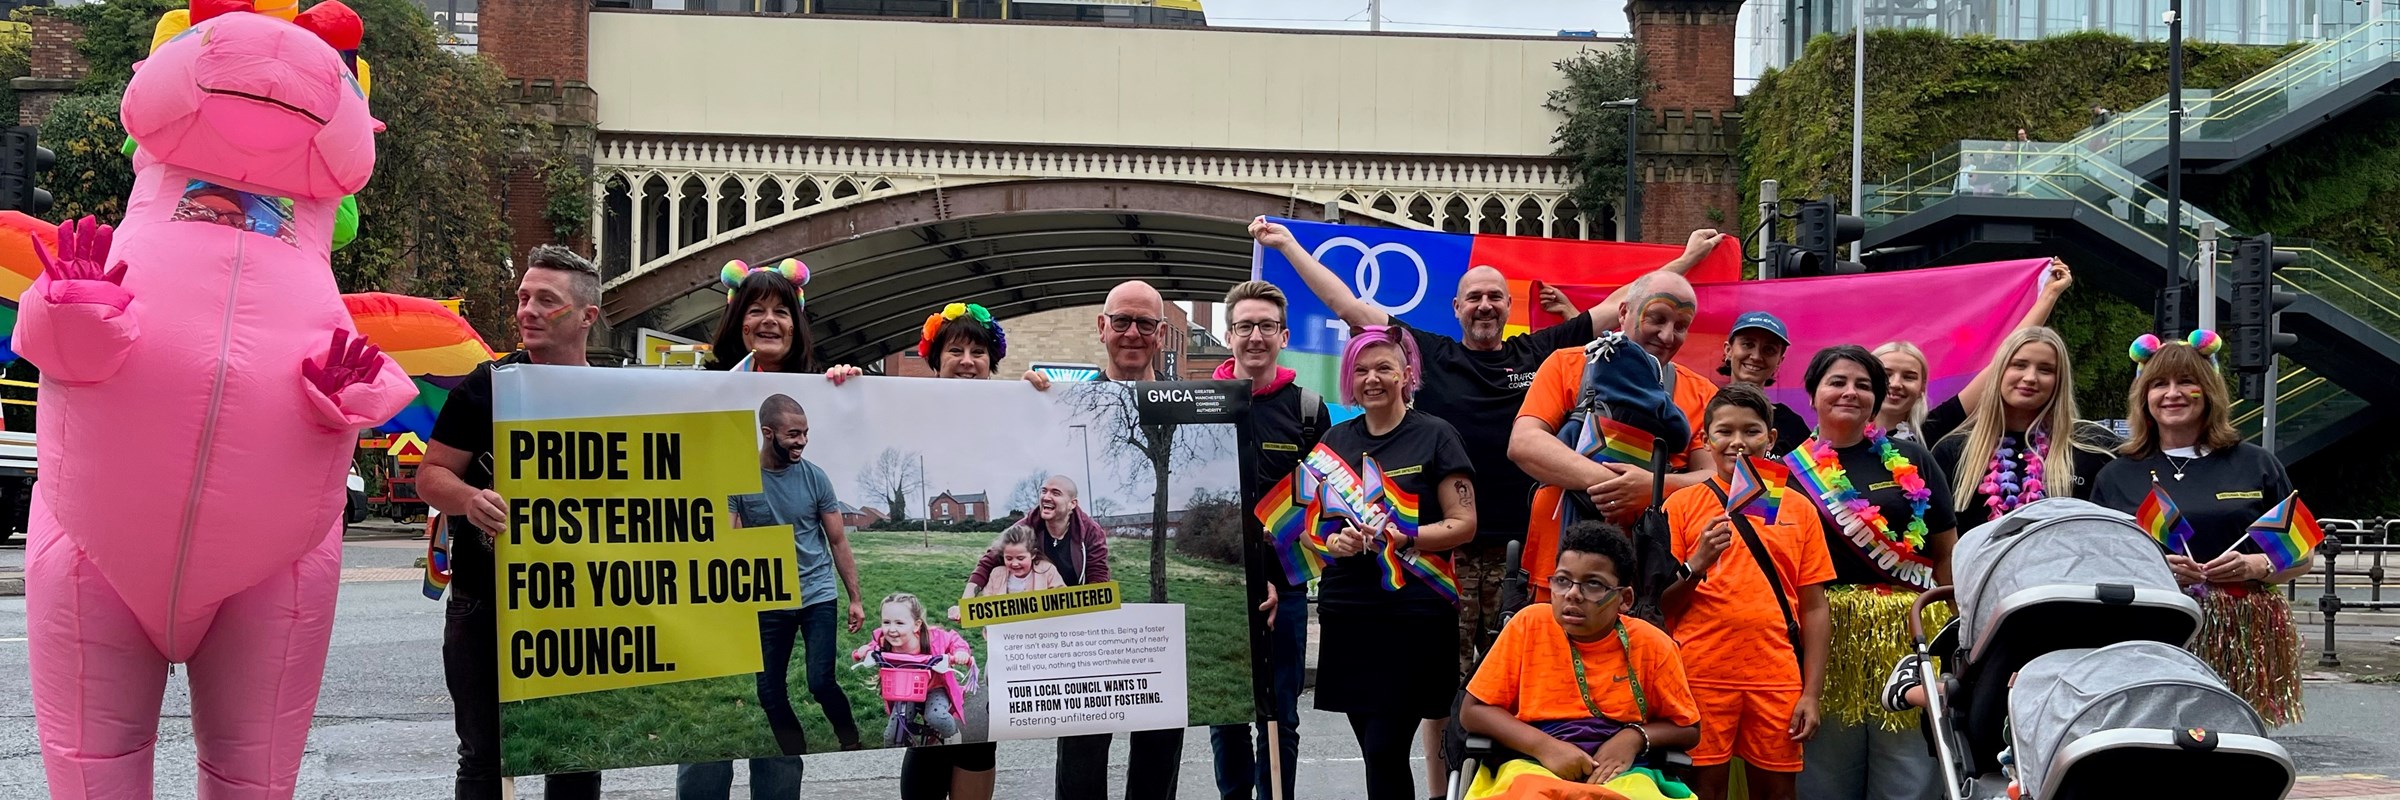 Group shot of adults and children with a banner for the campaign that says 'Pride in fostering for your local council'. Everyone is dressed in pride themed items and one is dressed in a blow up pink unicorn outfit.